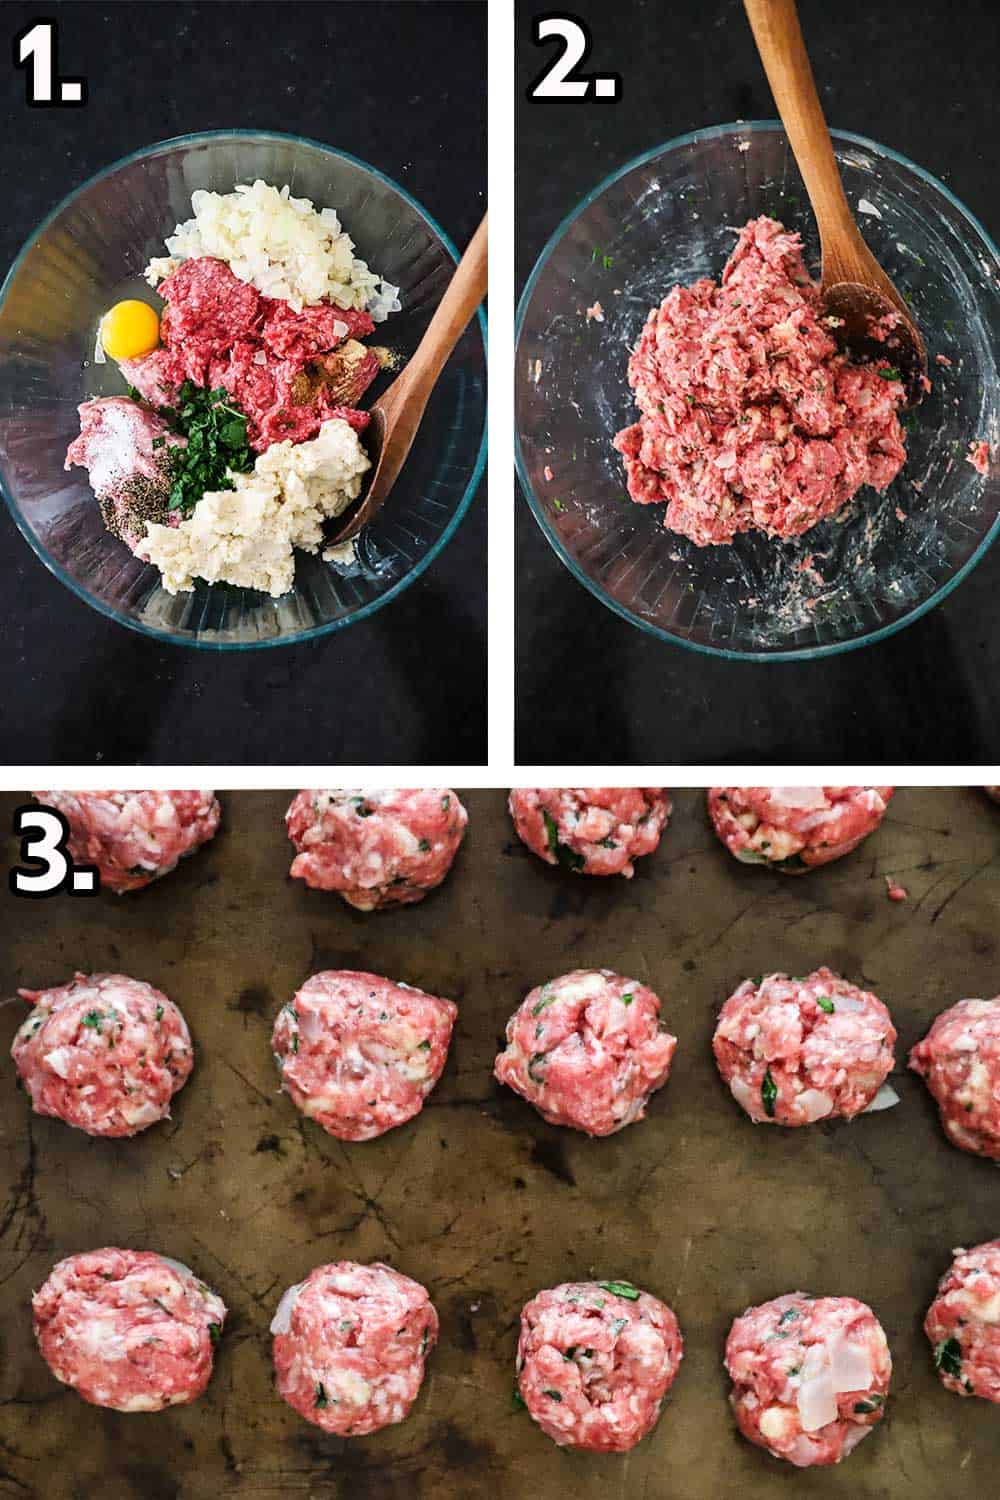 A glass bowl filled with ground meat, an egg, chopped parsley, spices, and milked-soaked breadcrumbs, and then the same bowl after everything is mixed, and then a baking sheet with uncooked meatballs on it.